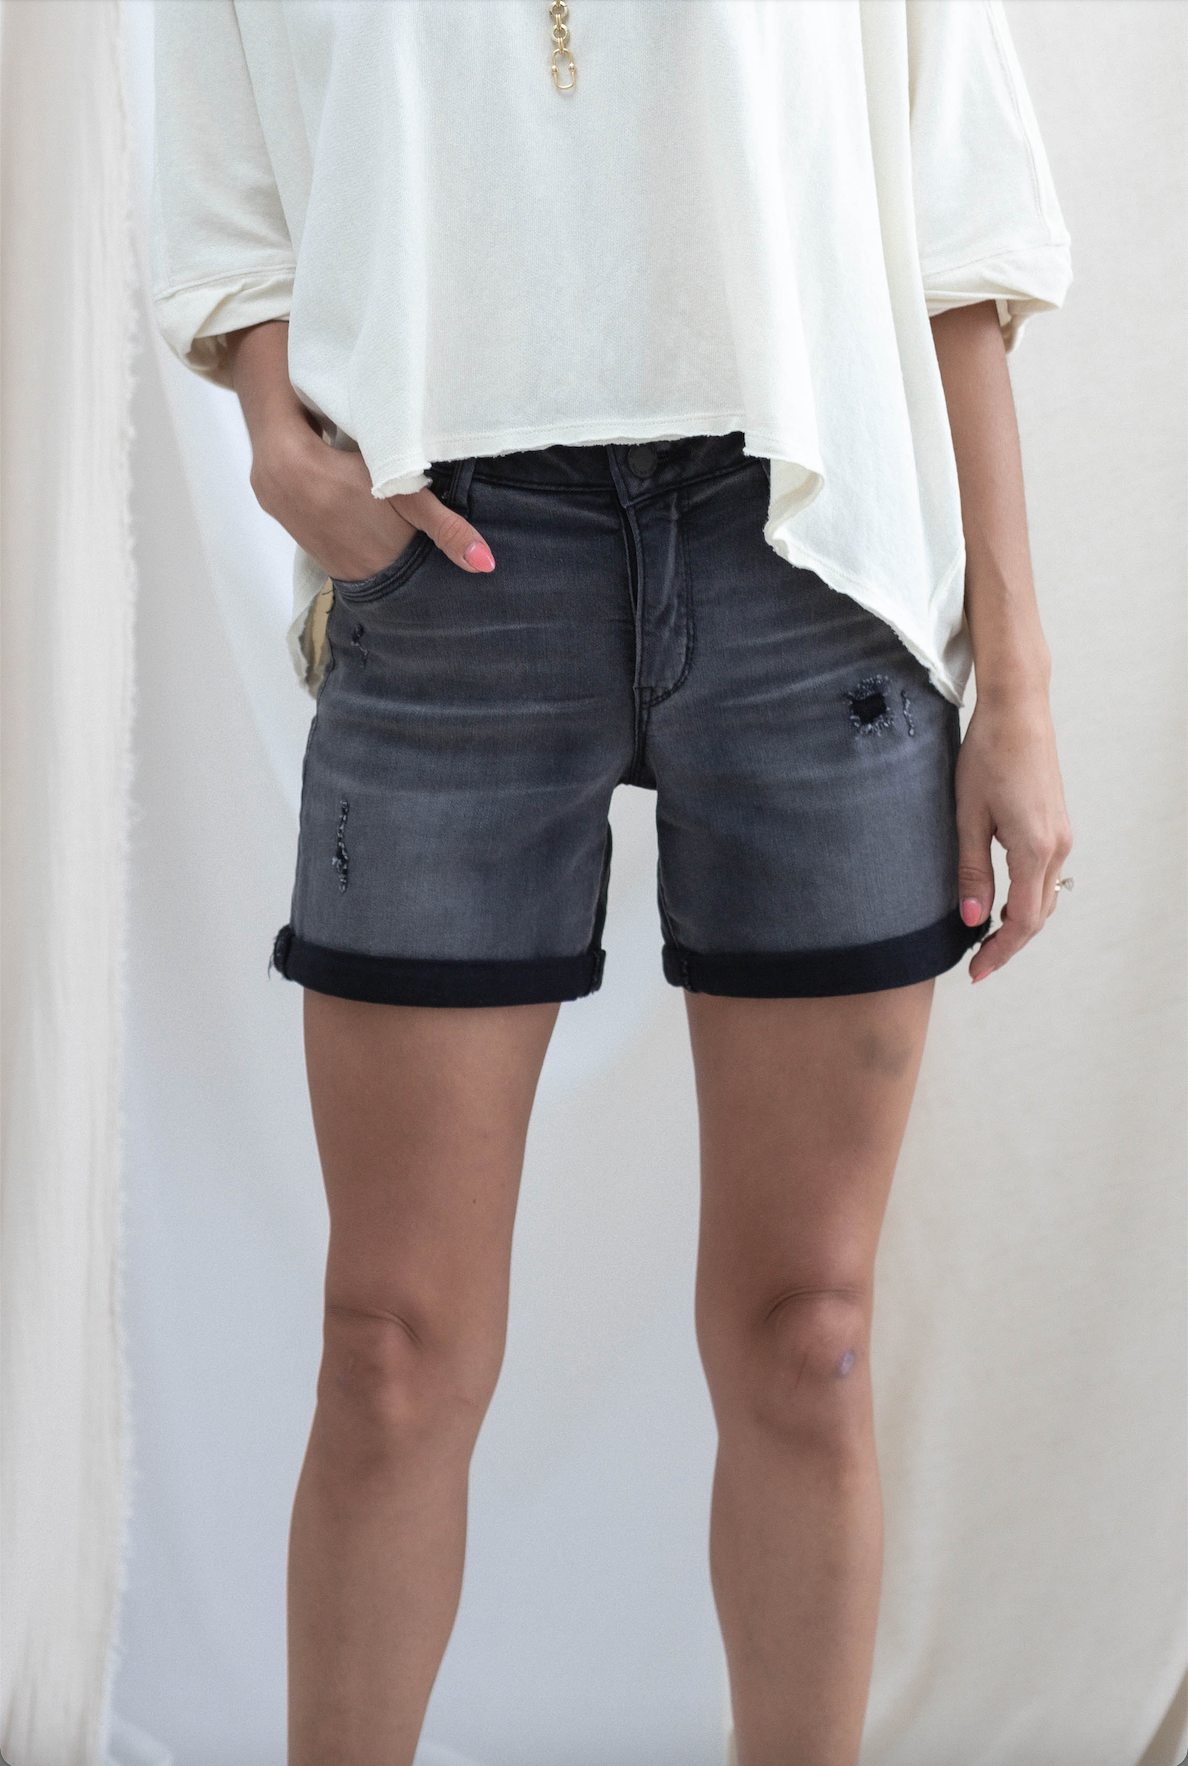 Perfect Length Shorts - 2 Colors